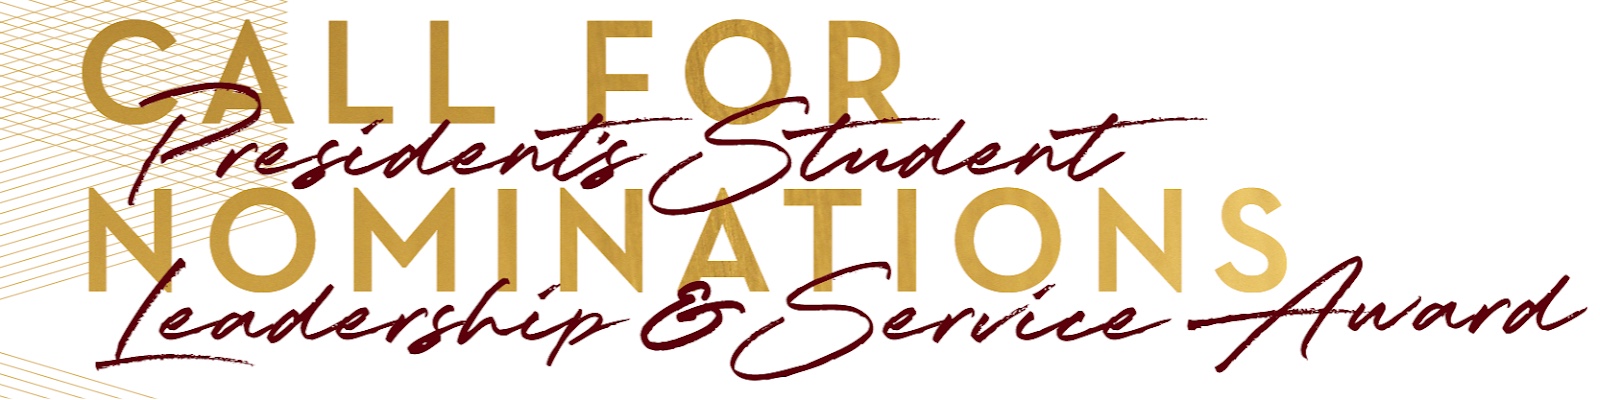 Banner that reads 'Call for Nominations: President's Student Leadership Award' in gold and maroon colored text.